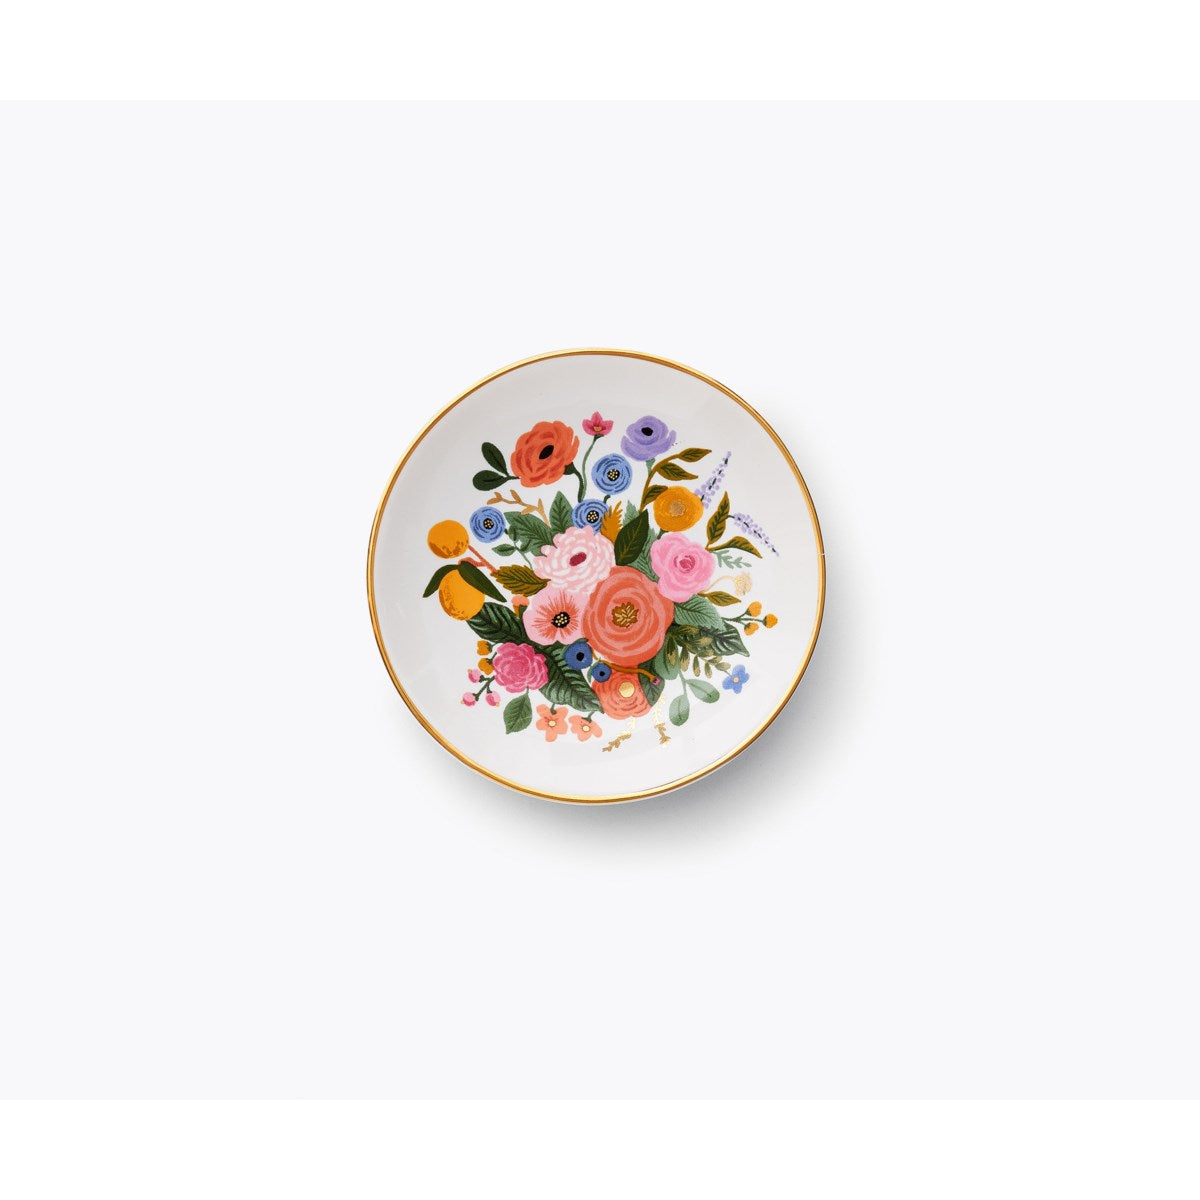 Garden Party Floral Ring Dish